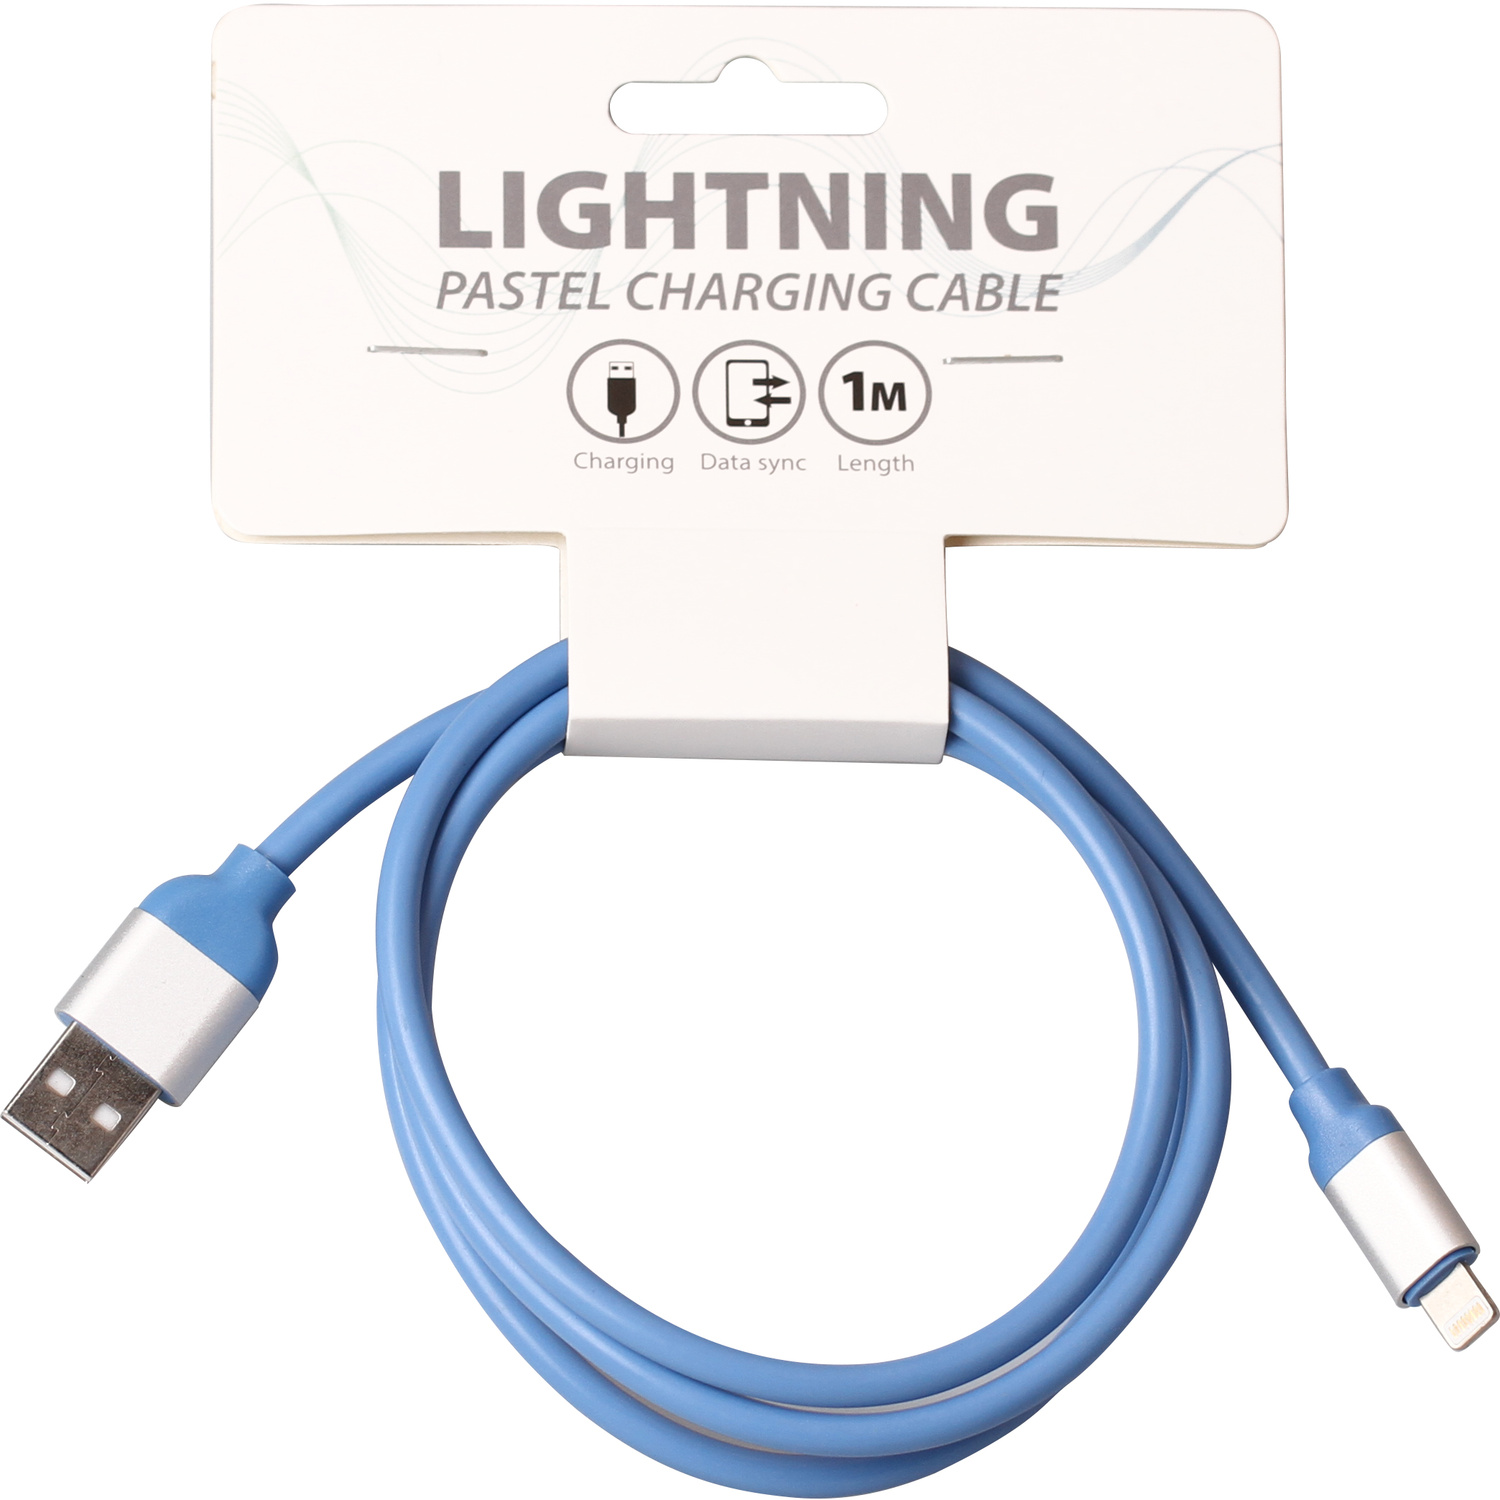 Lightning Pastel Charging Cable Image 1